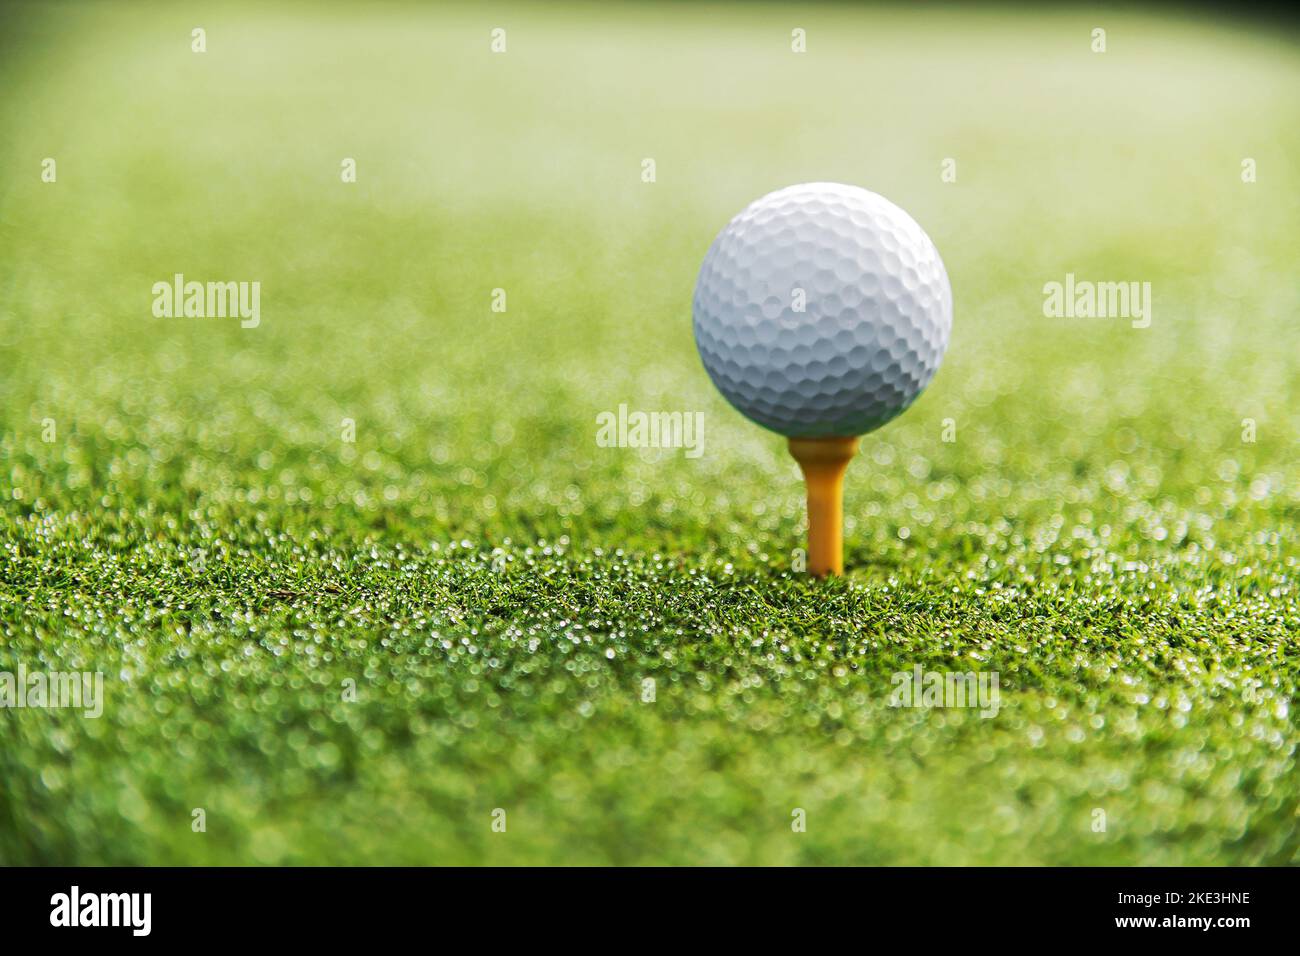 Soft focus of white small golf ball on tee ready to hit in game on green course Stock Photo